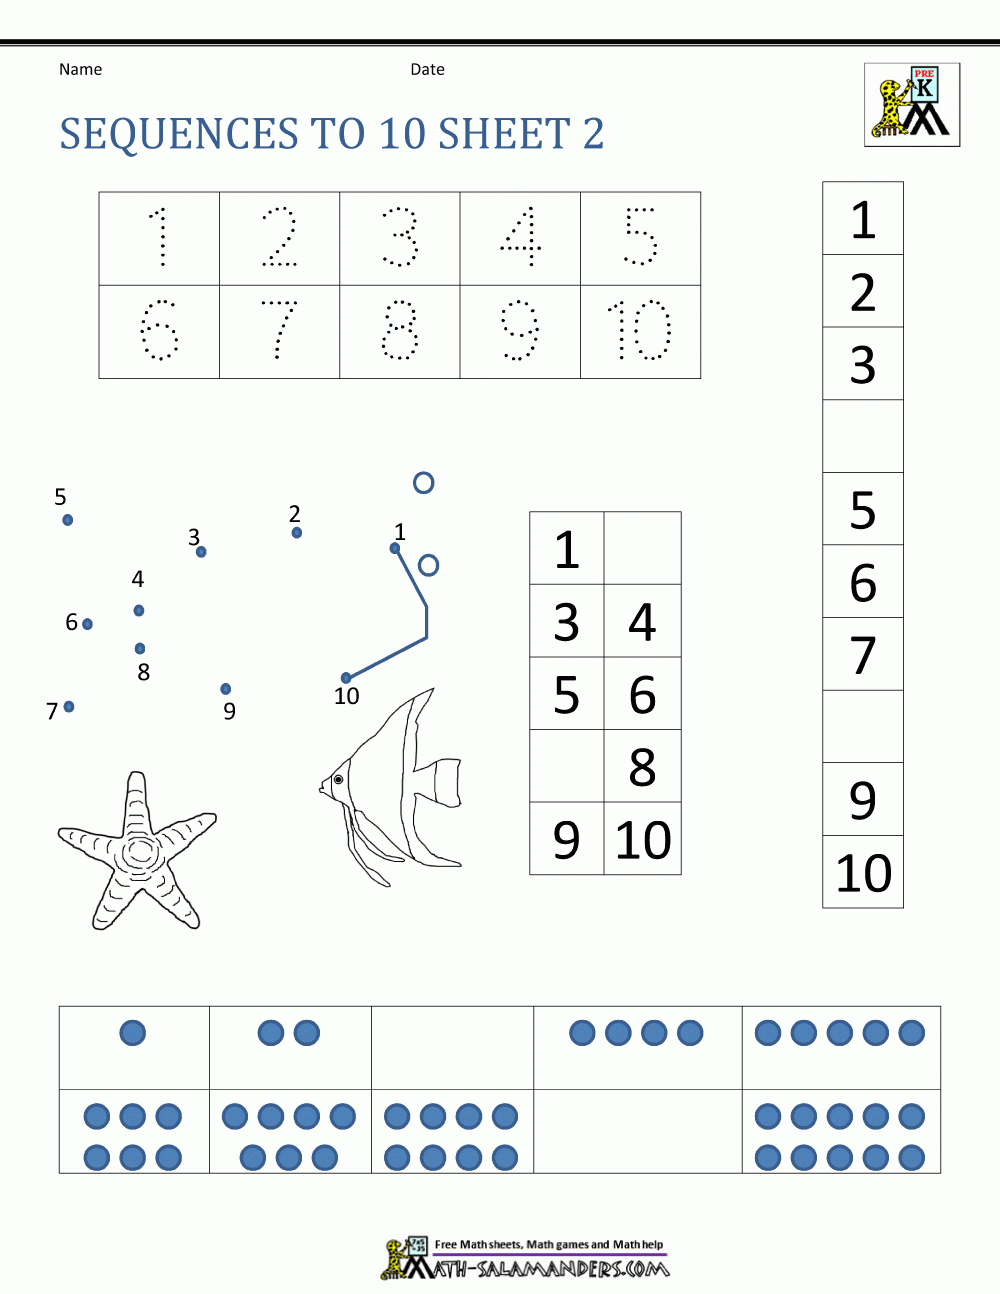 Preschool Number Worksheets - Sequencing To 10 with Multiplication Worksheets Numbers 1-10